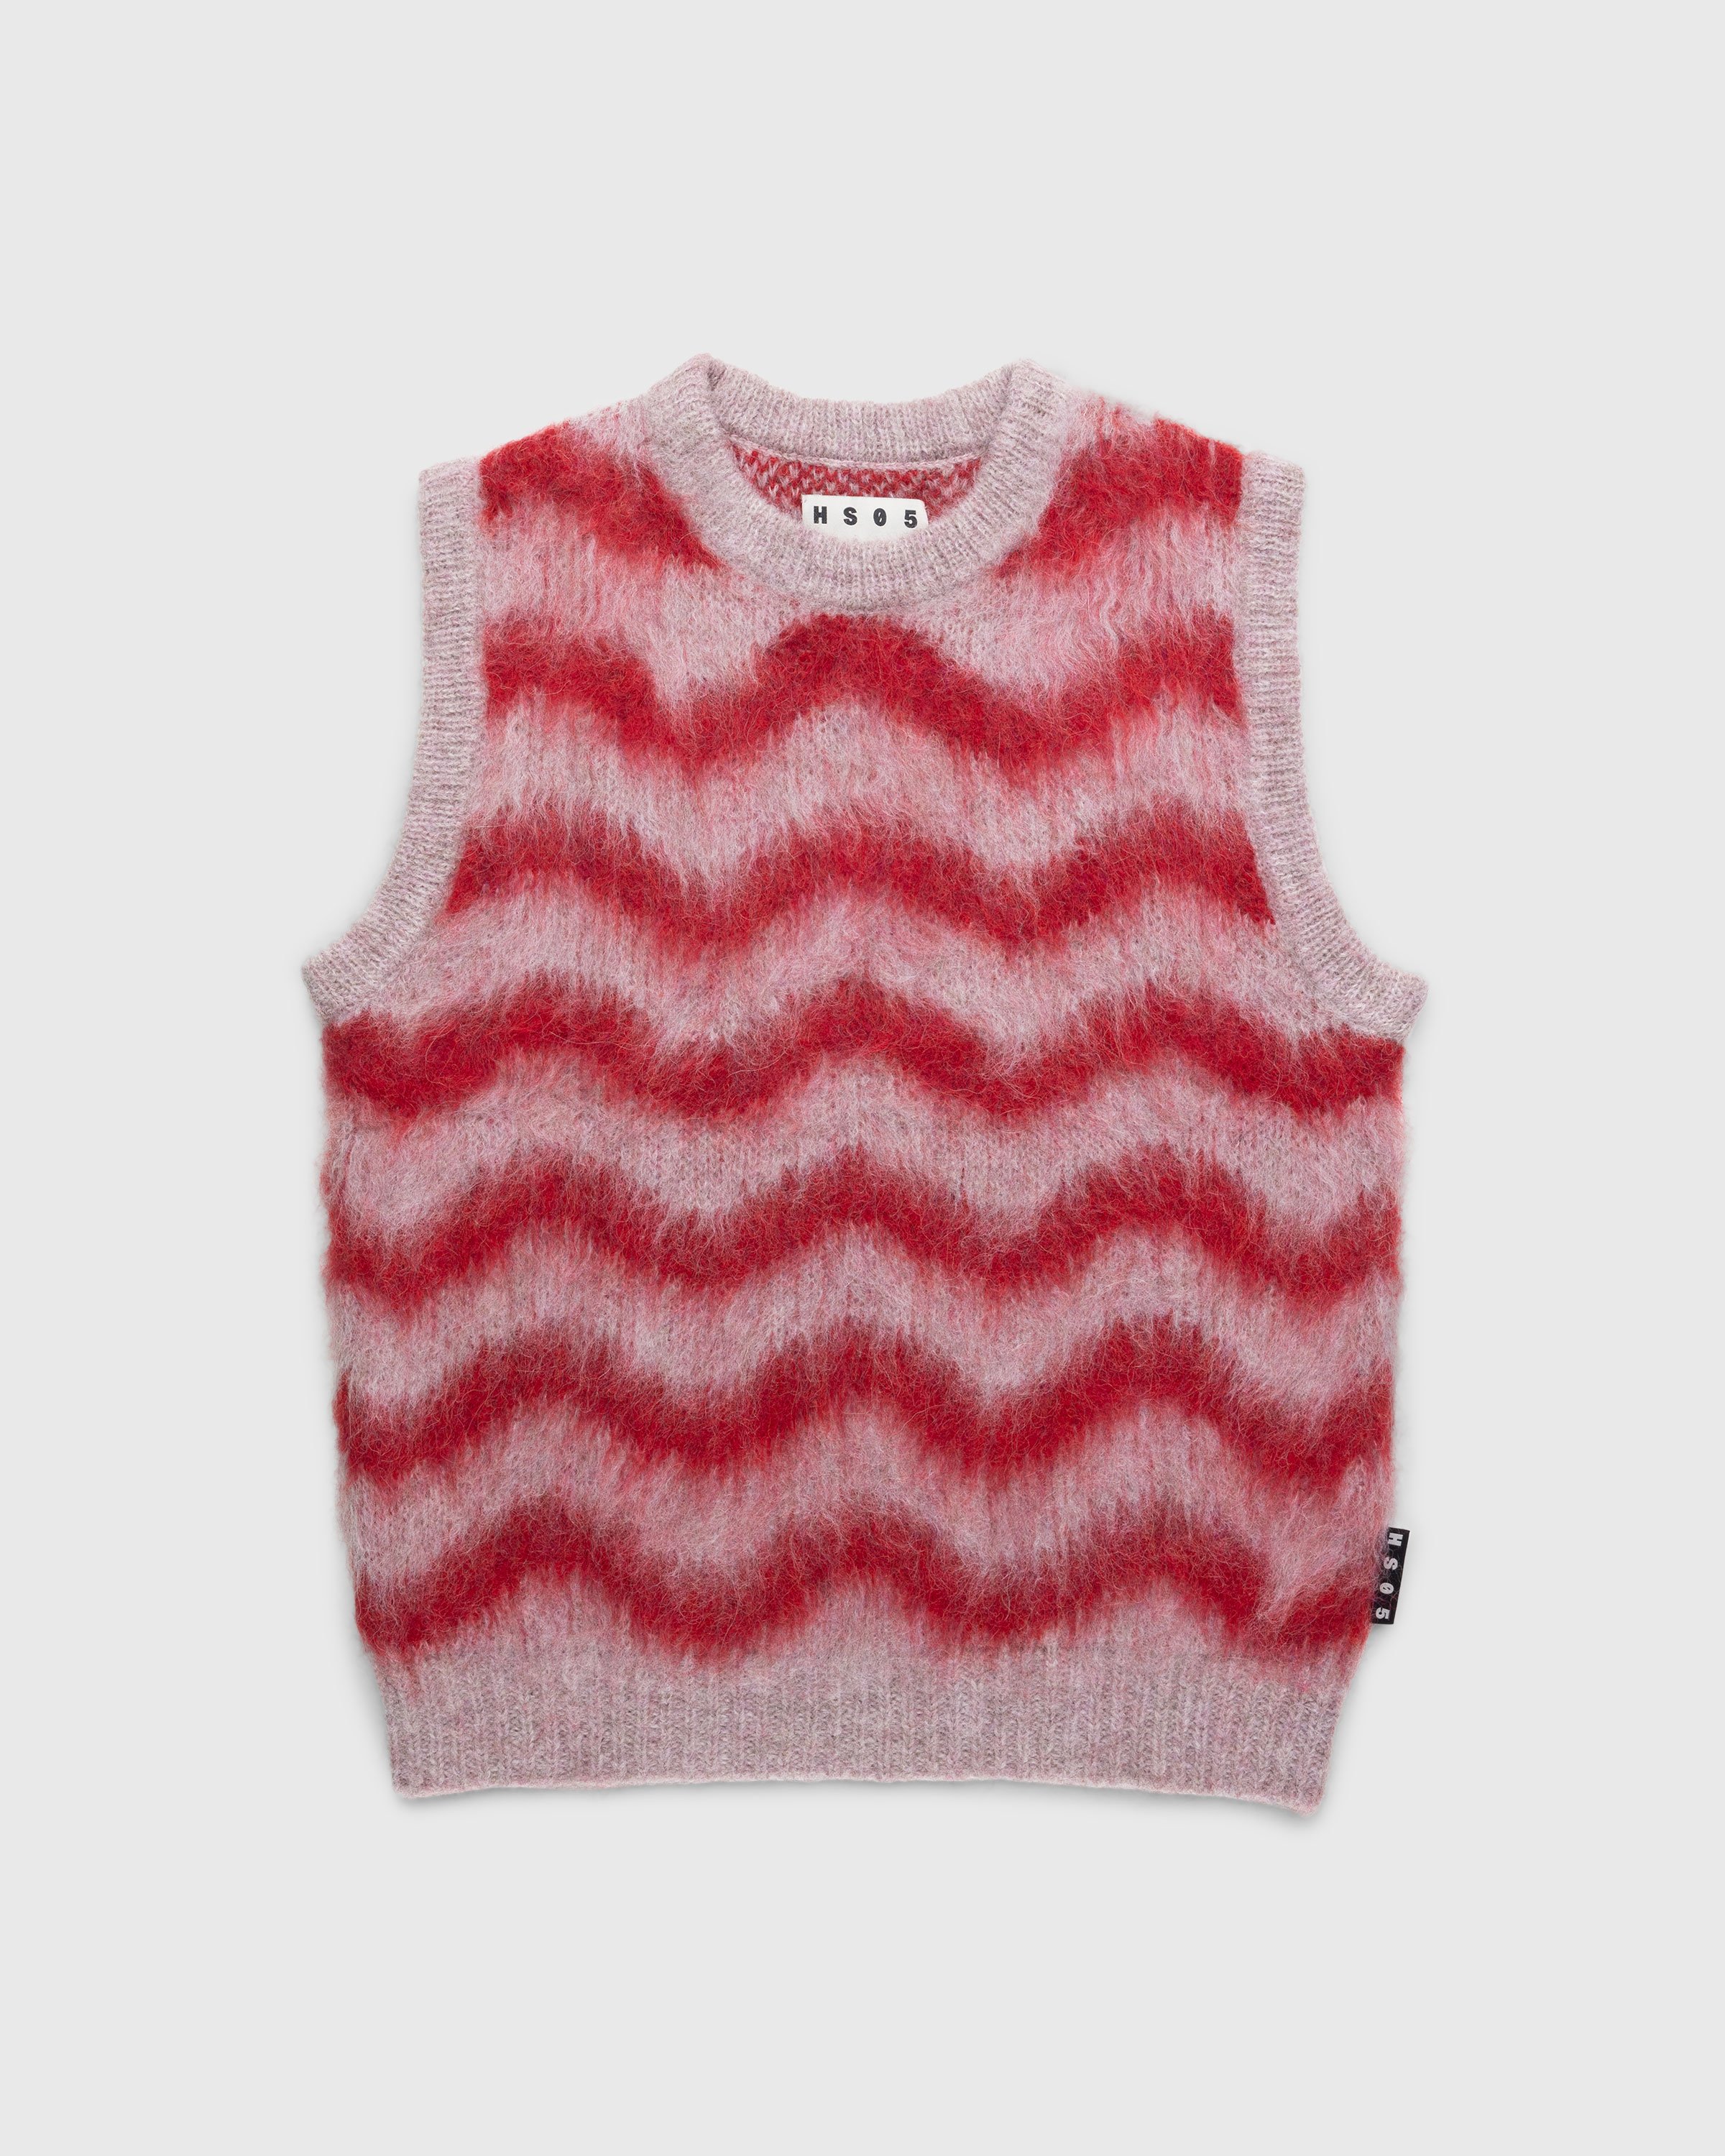 Highsnobiety HS05 - Alpaca Fuzzy Wave Sweater Vest Pale Rose/Red - Clothing - Multi - Image 1